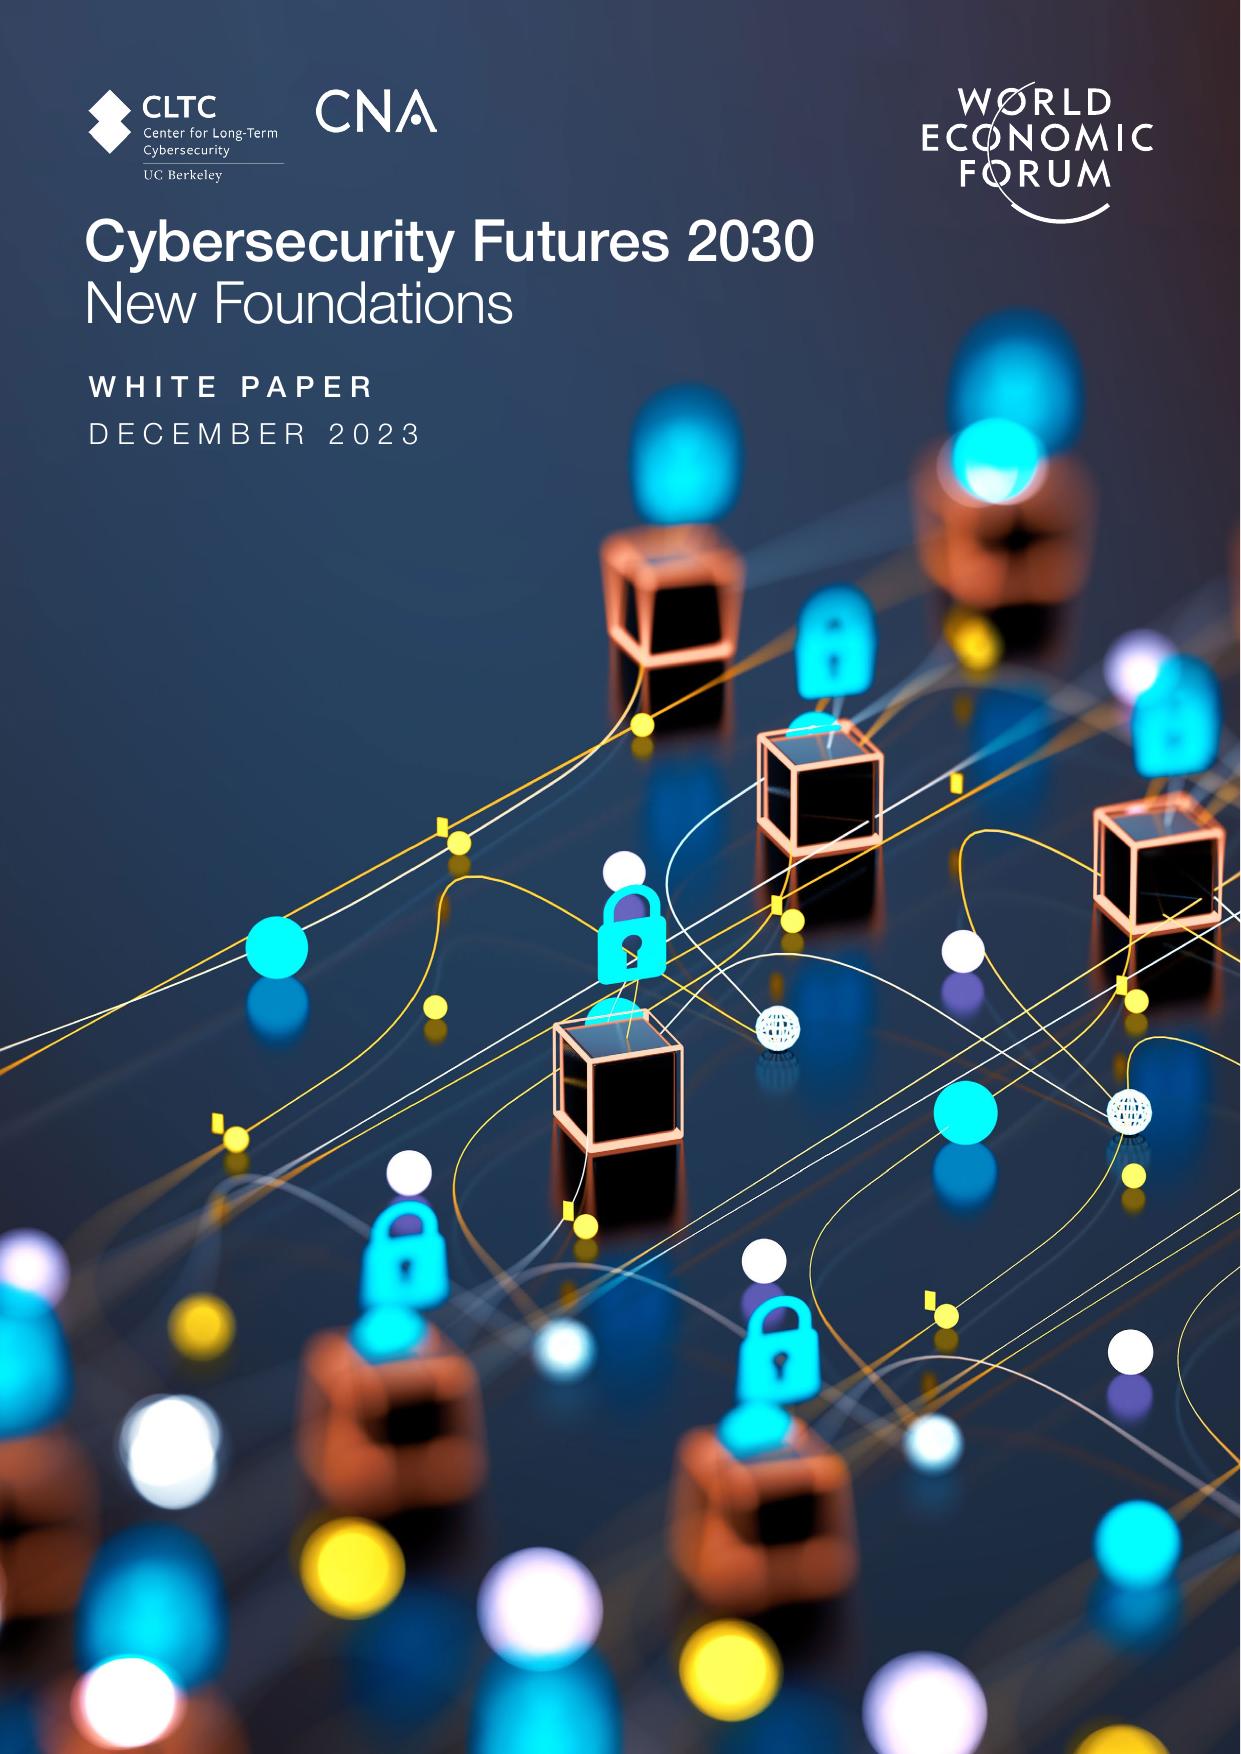 WEF Cybersecurity Futures 2030 New Foundations 2023 White Paper